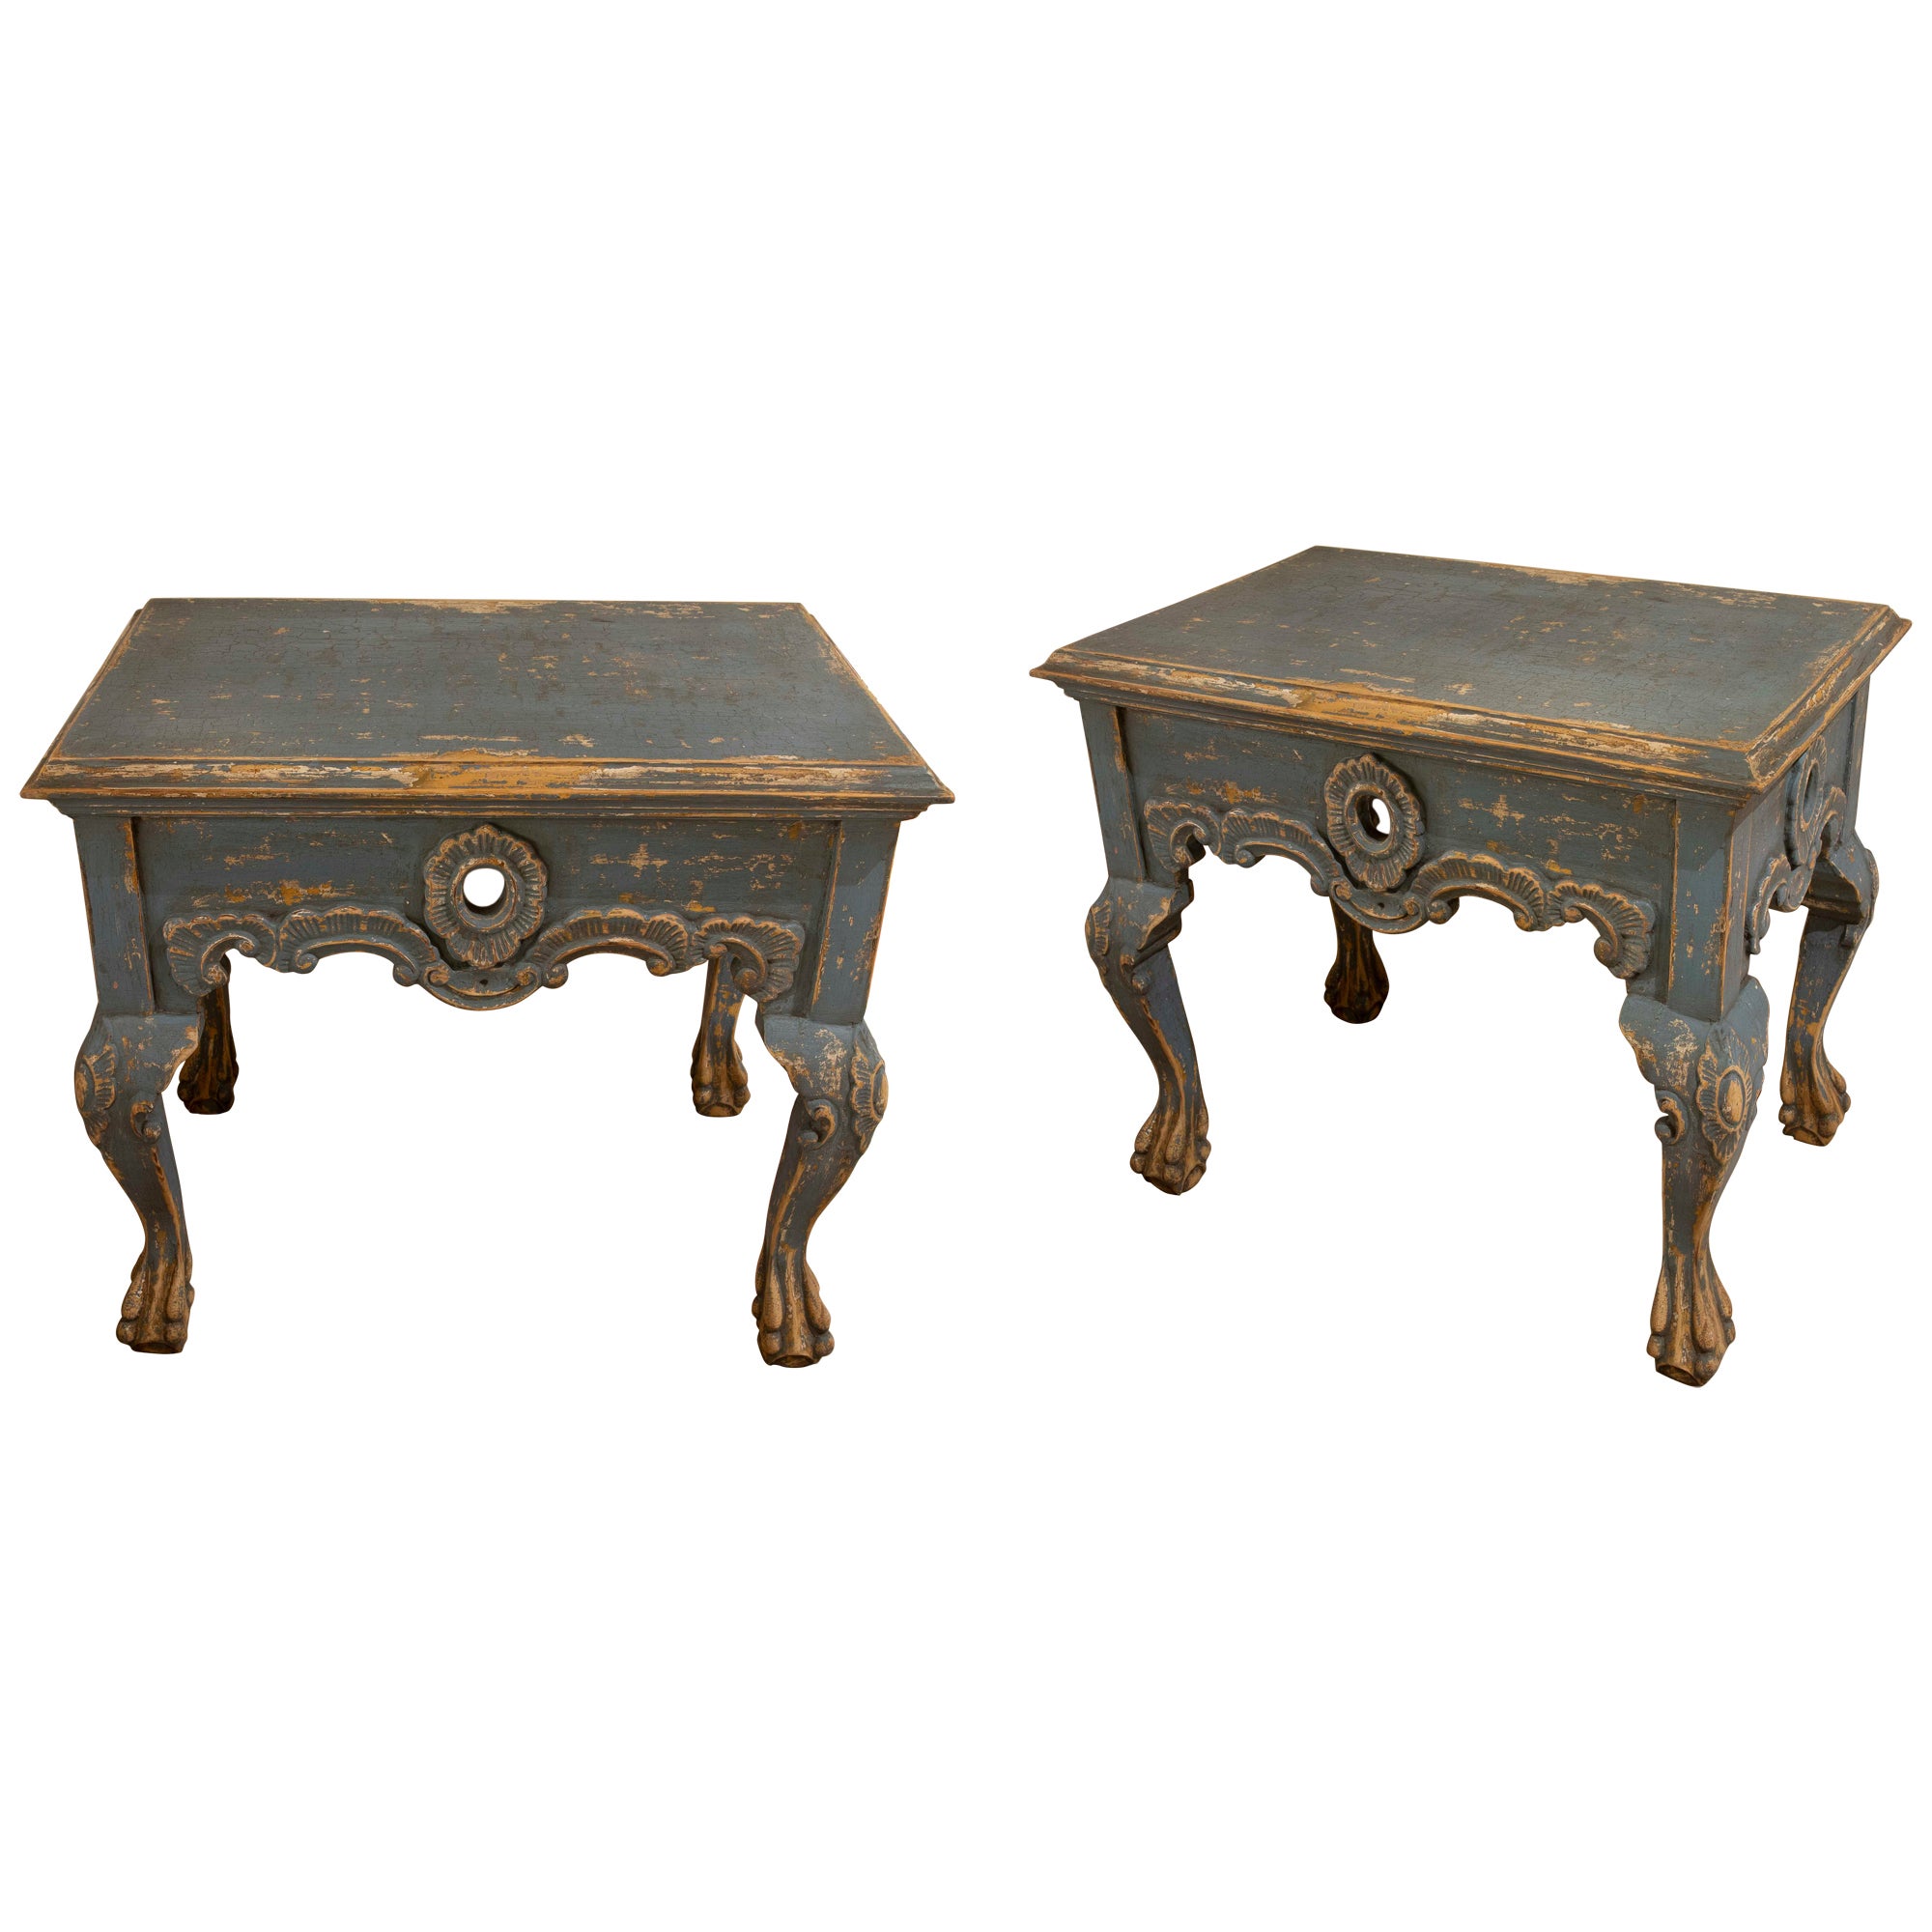 Pair of polychromed Wooden Tables in Blue with Claw Feet